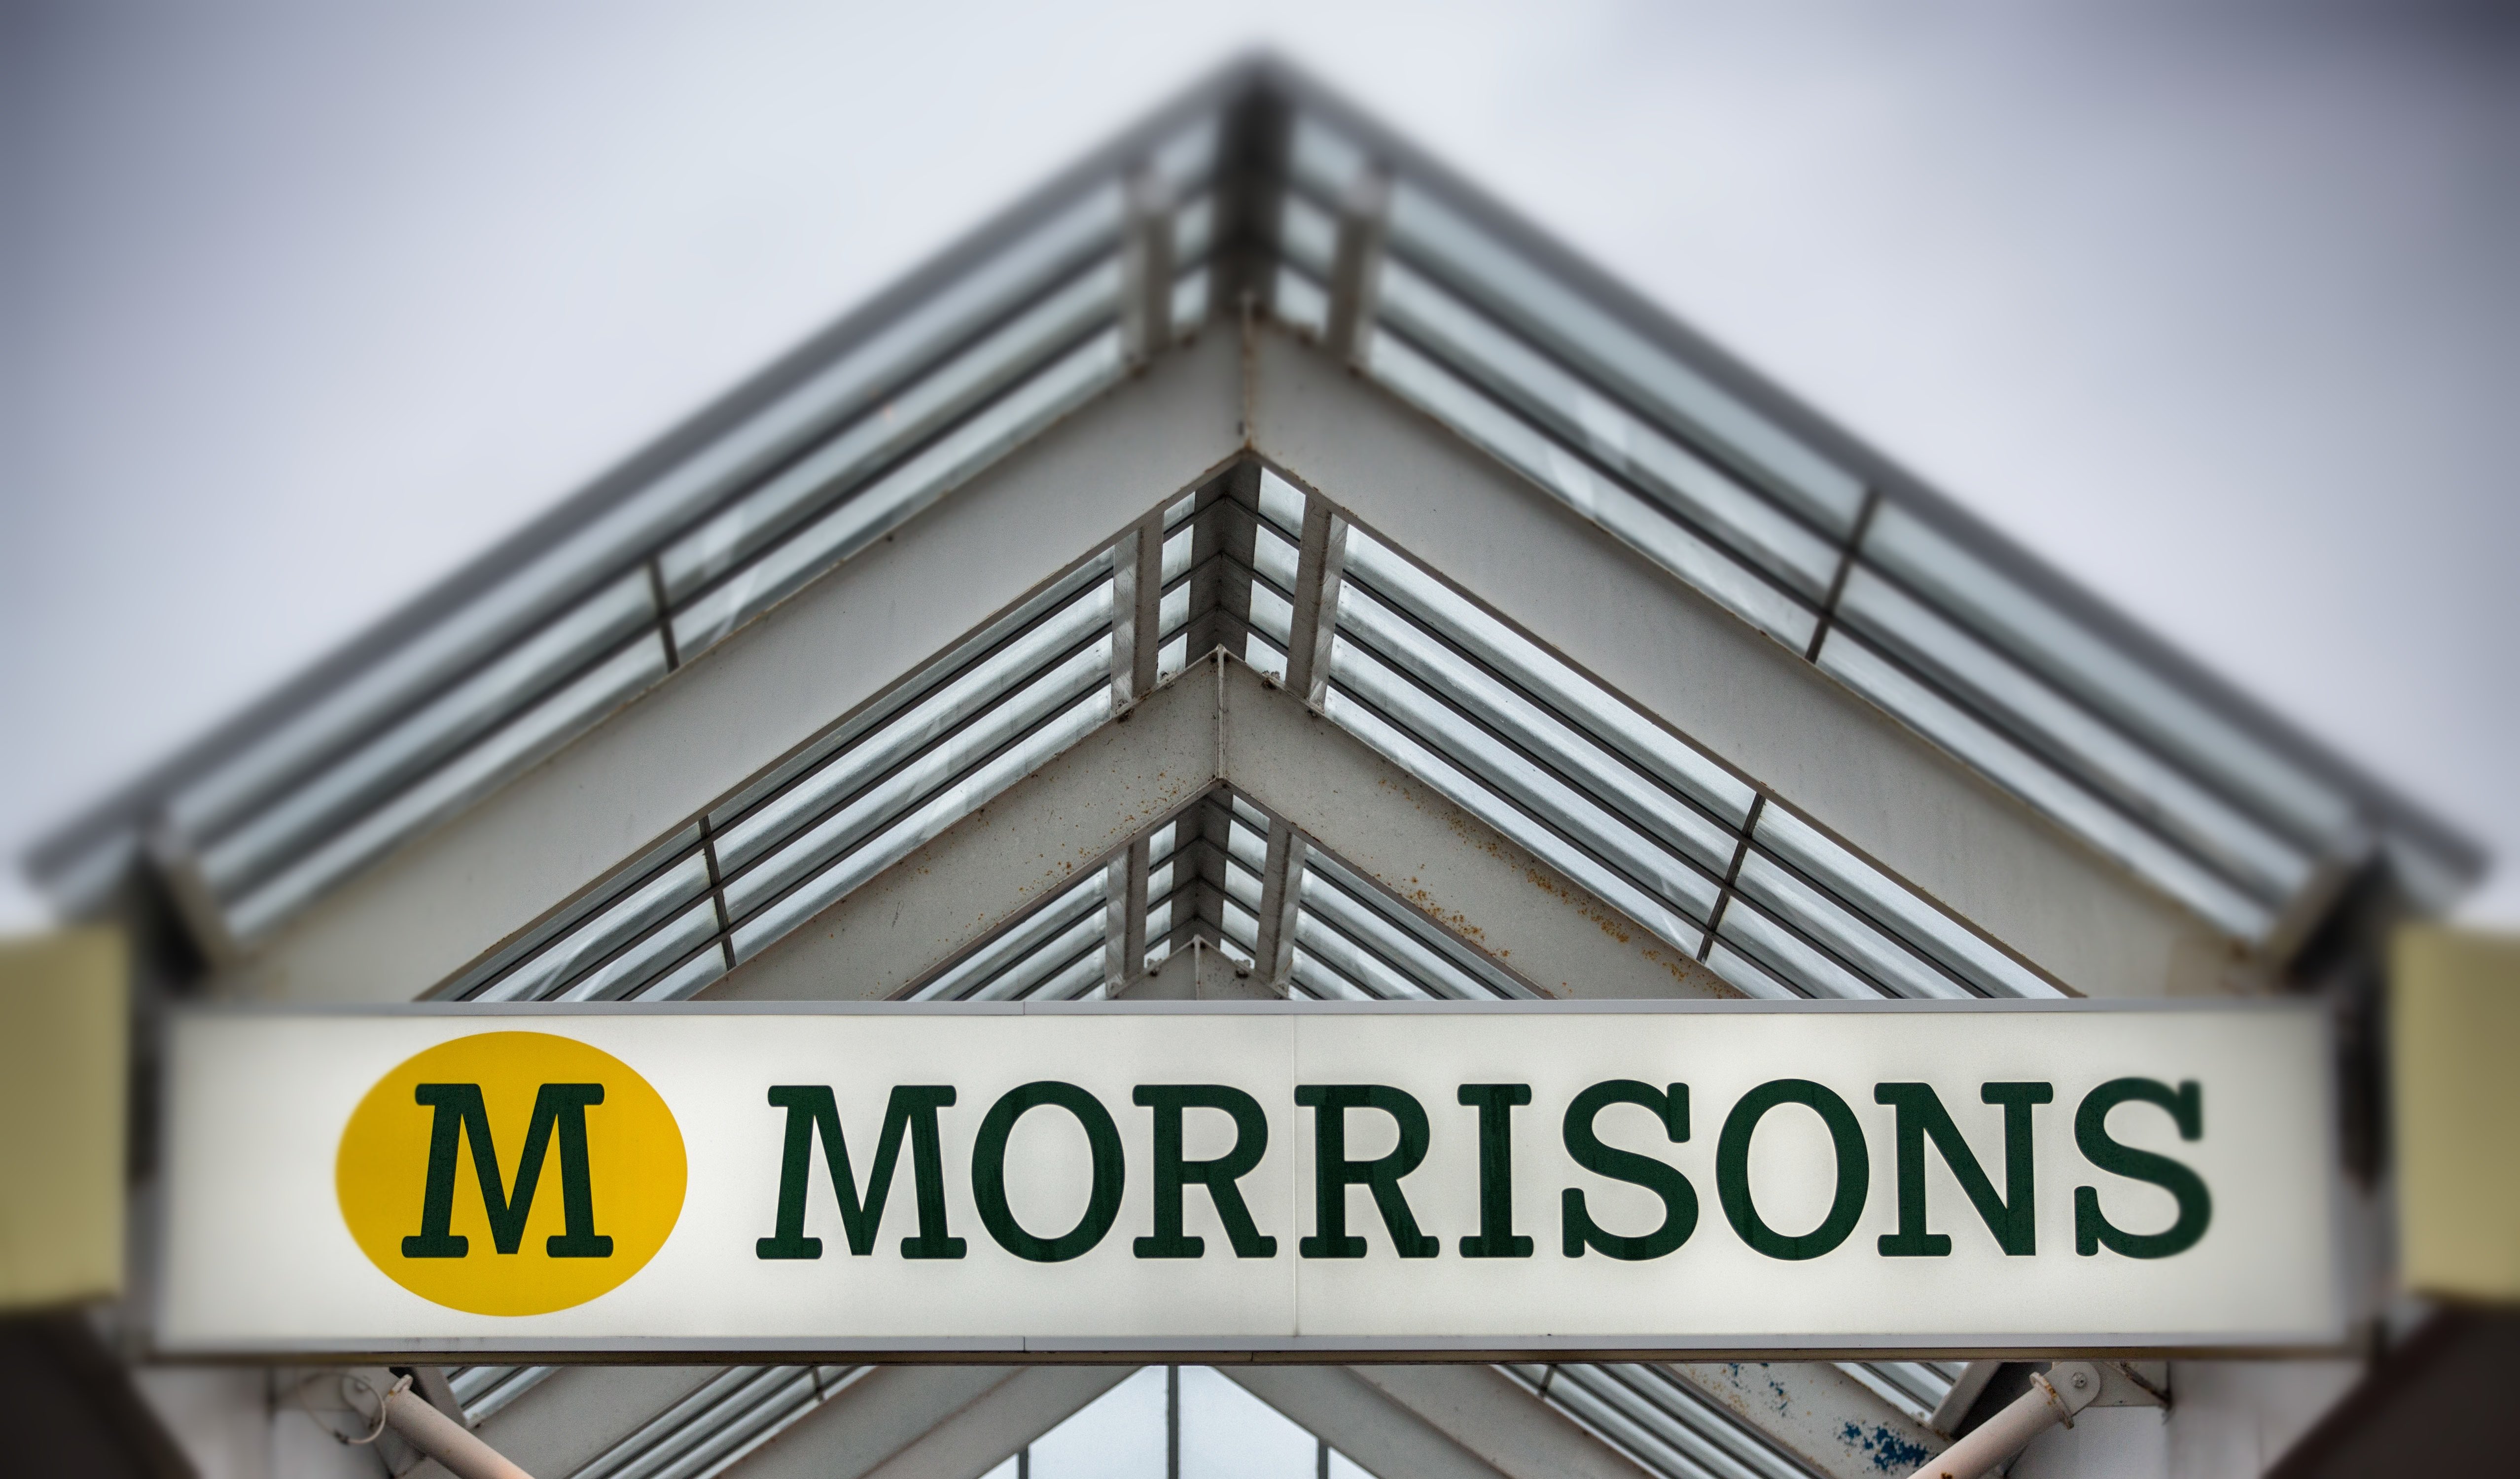 BRISTOL, ENGLAND - NOVEMBER 18: (EDITORS NOTE: This image was created using digital filters) The Morrisons sign is displayed outside a branch of the supermarket on November 18, 2015 in Bristol, England. As the crucial Christmas retail period approaches, all the major supermarkets are becoming increasingly competitive to retain and increase their share of the market. (Photo by Matt Cardy/Getty Images)